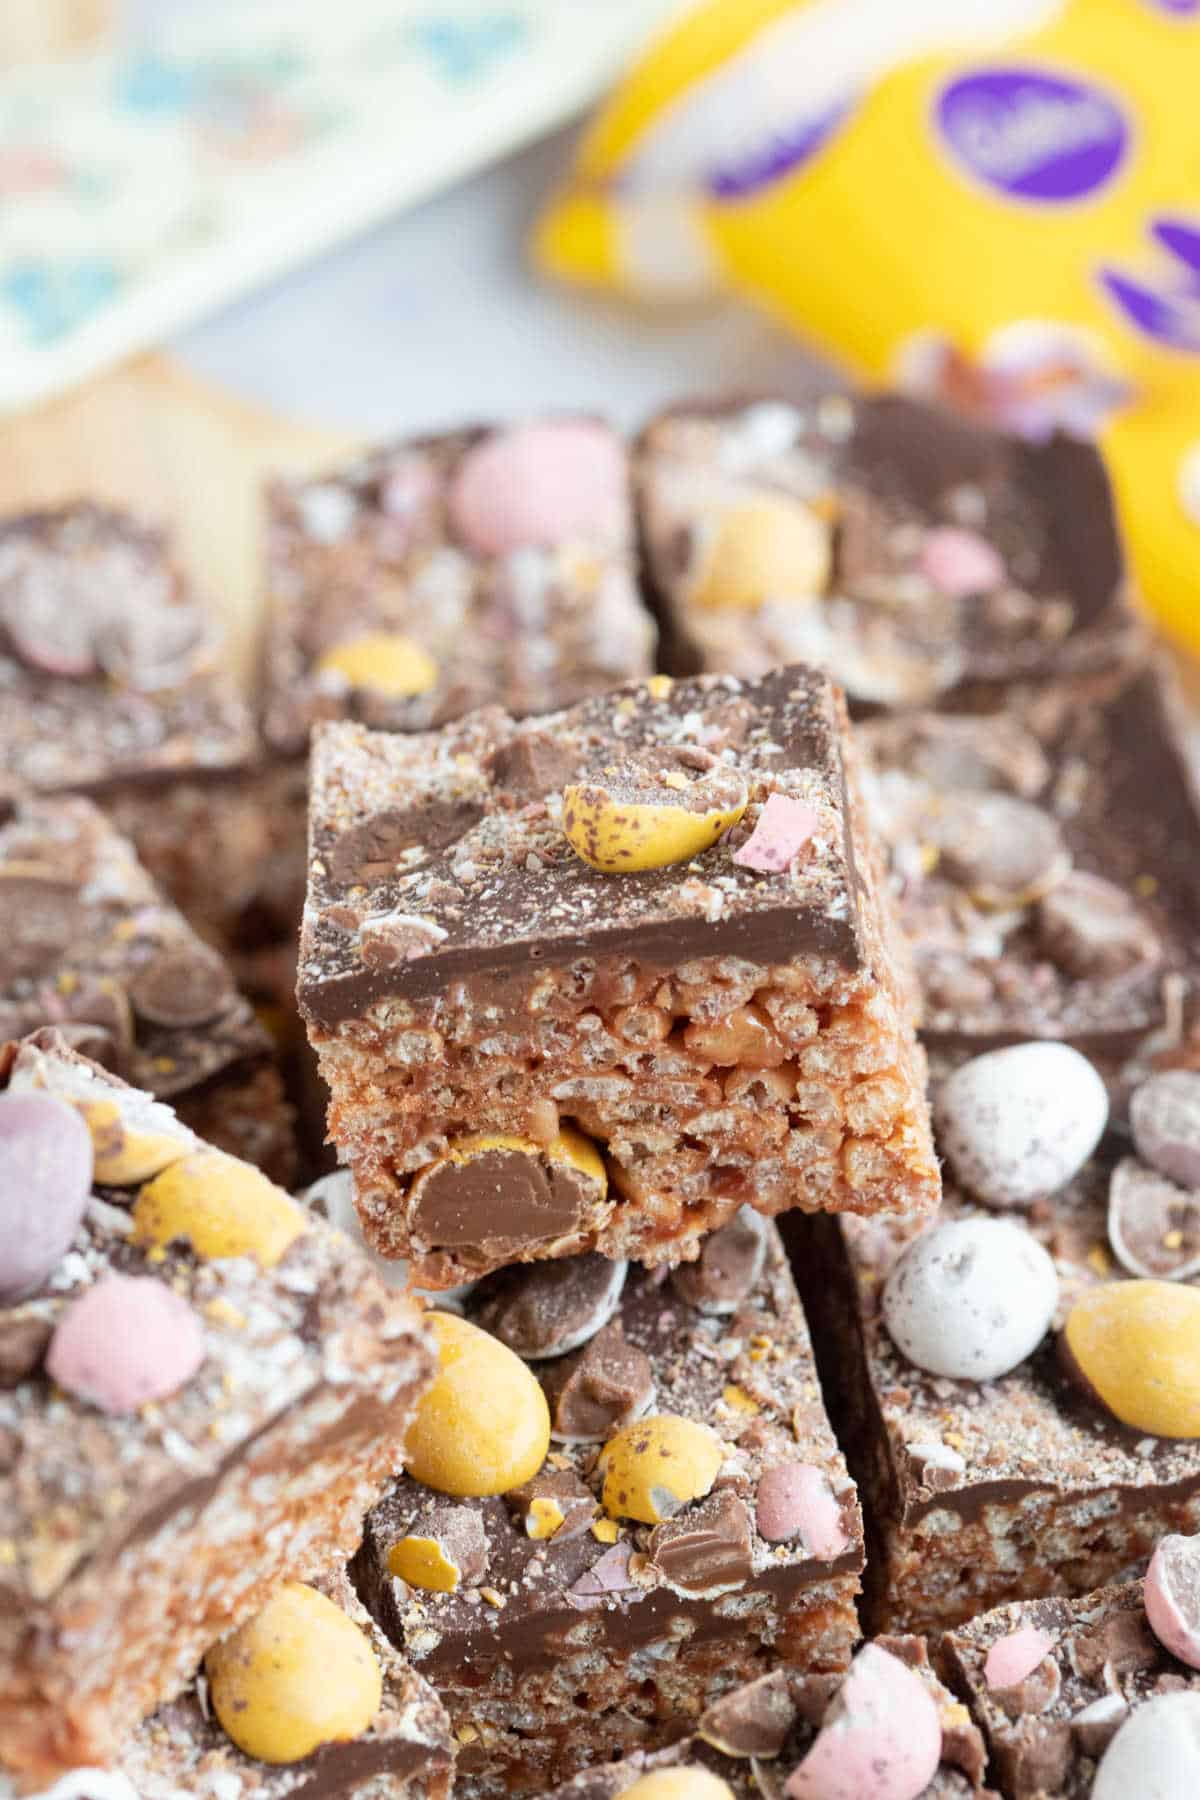 Rice krispie square topped with chocolate and mini eggs.
